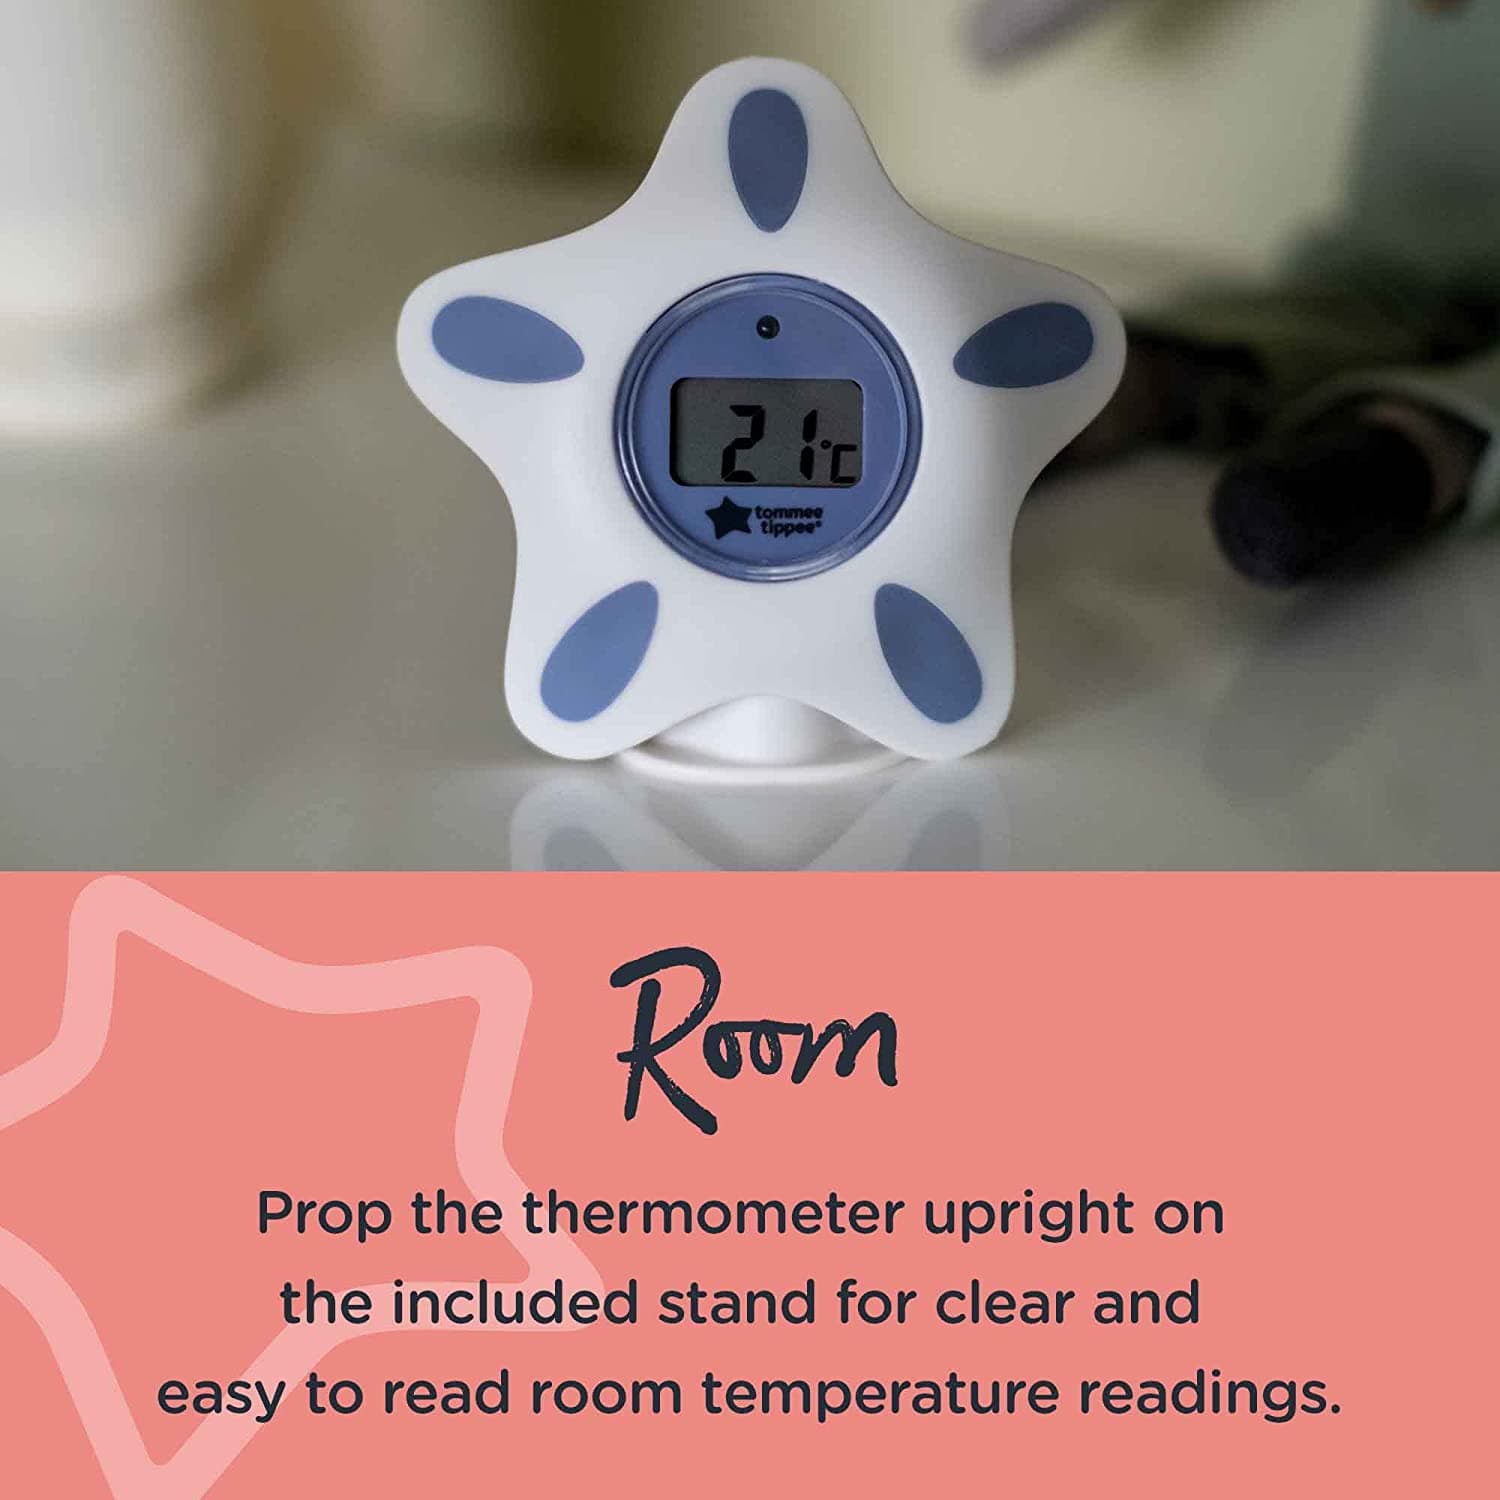 Bath and Room Thermometer by Tommee Tippee.